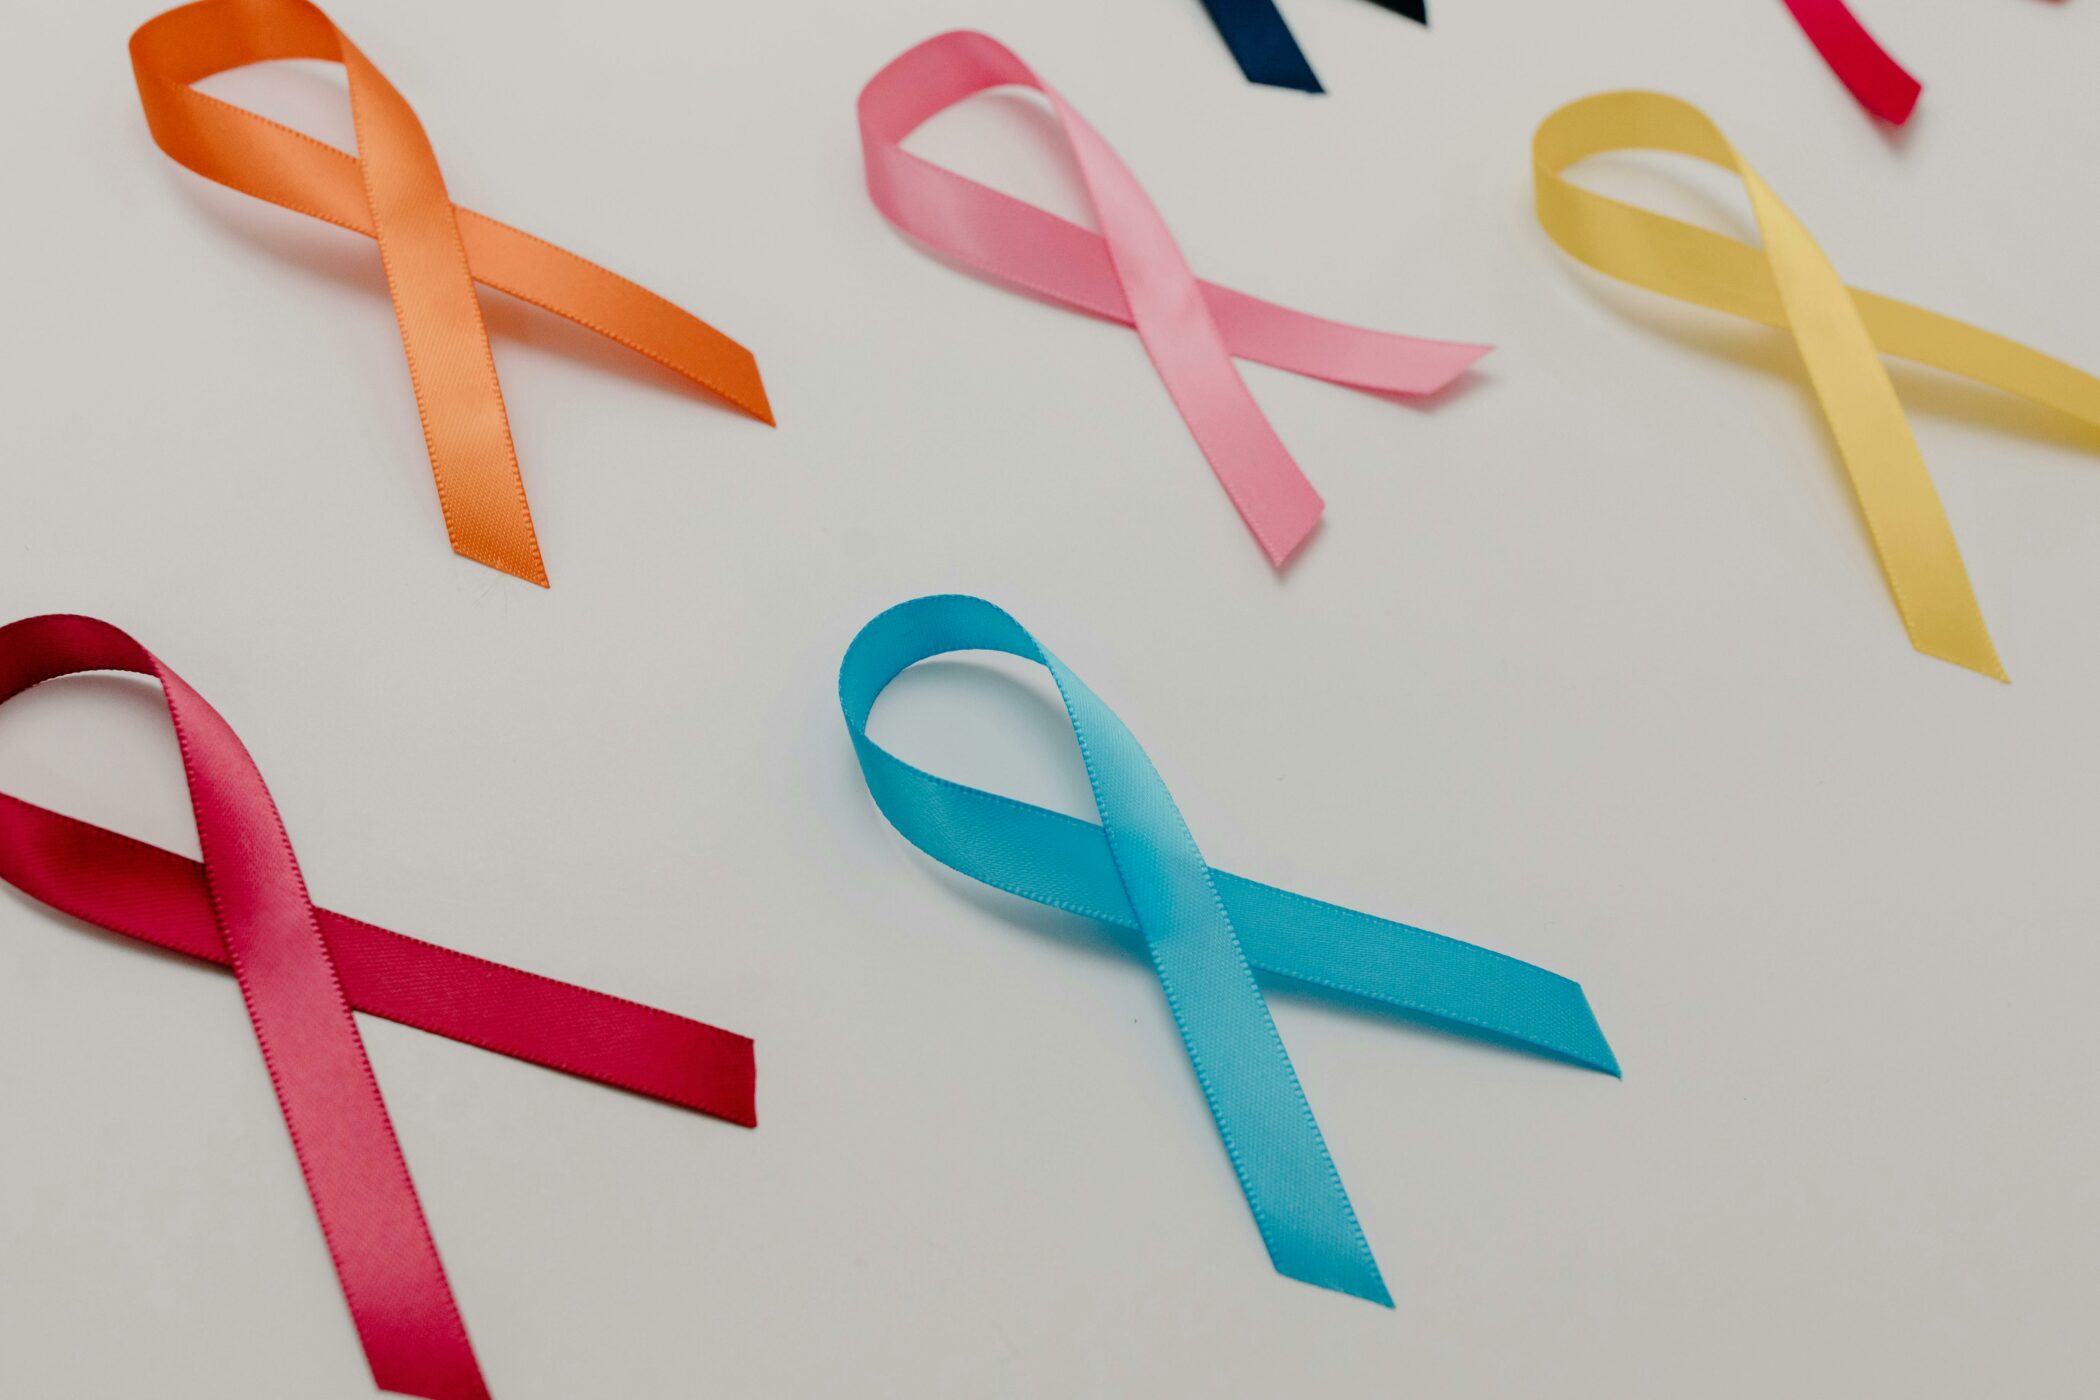 Red, blue, orange, pink, and yellow cancer ribbons are laid on a white surface.